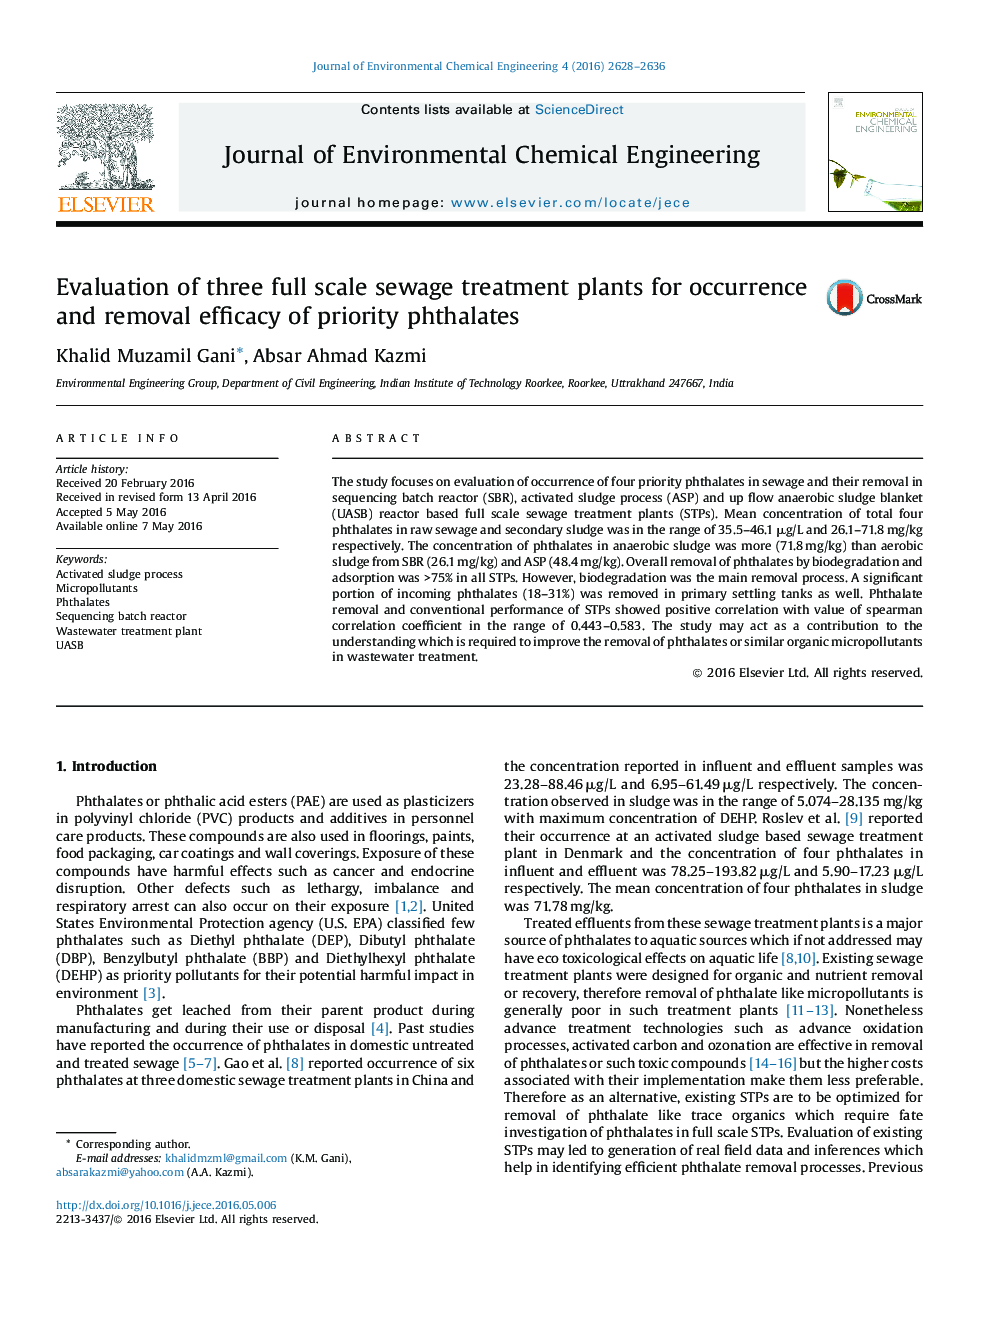 Evaluation of three full scale sewage treatment plants for occurrence and removal efficacy of priority phthalates